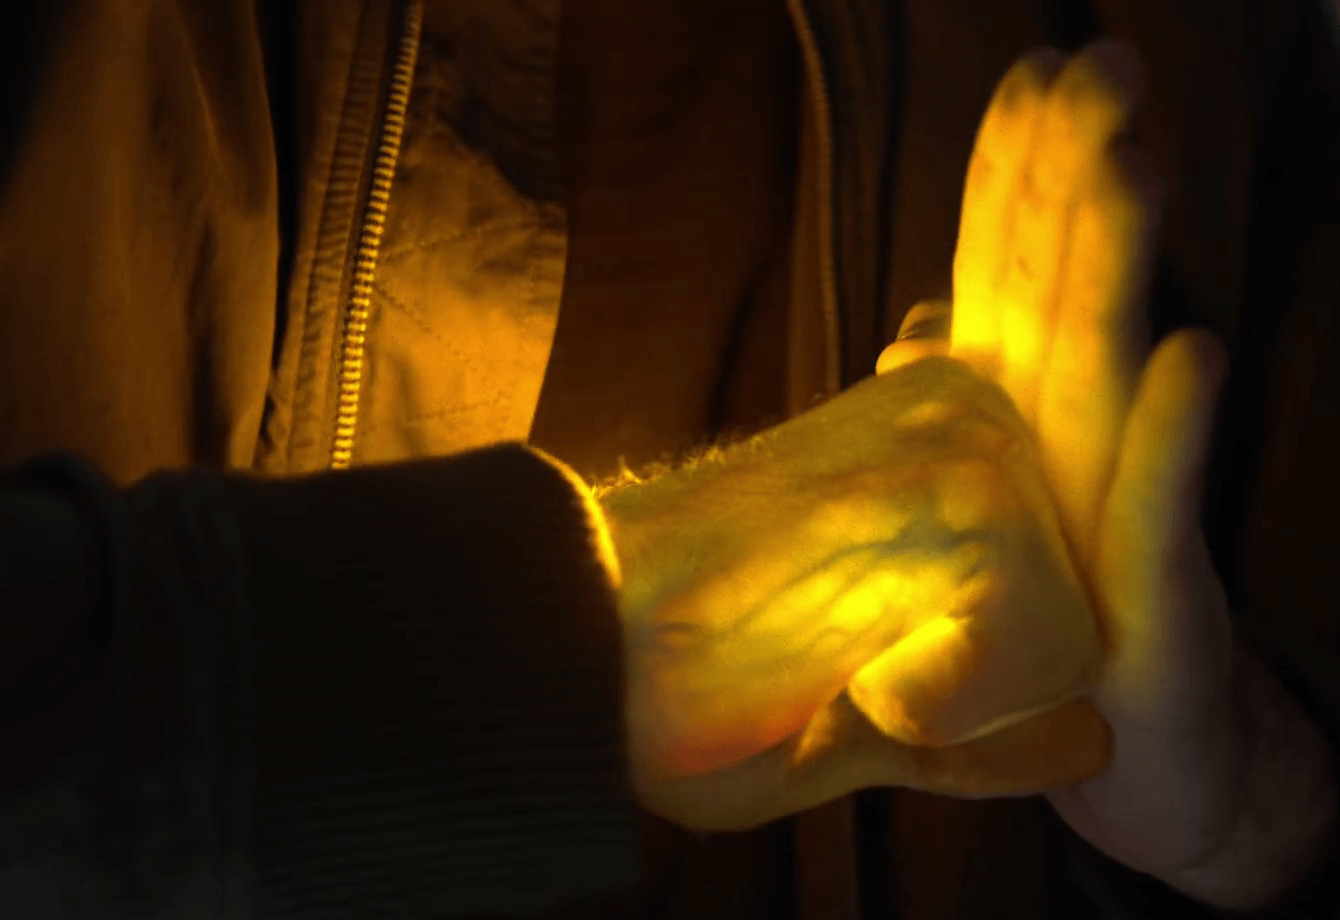 Yellow Power Iron Fist Wallpapers HD